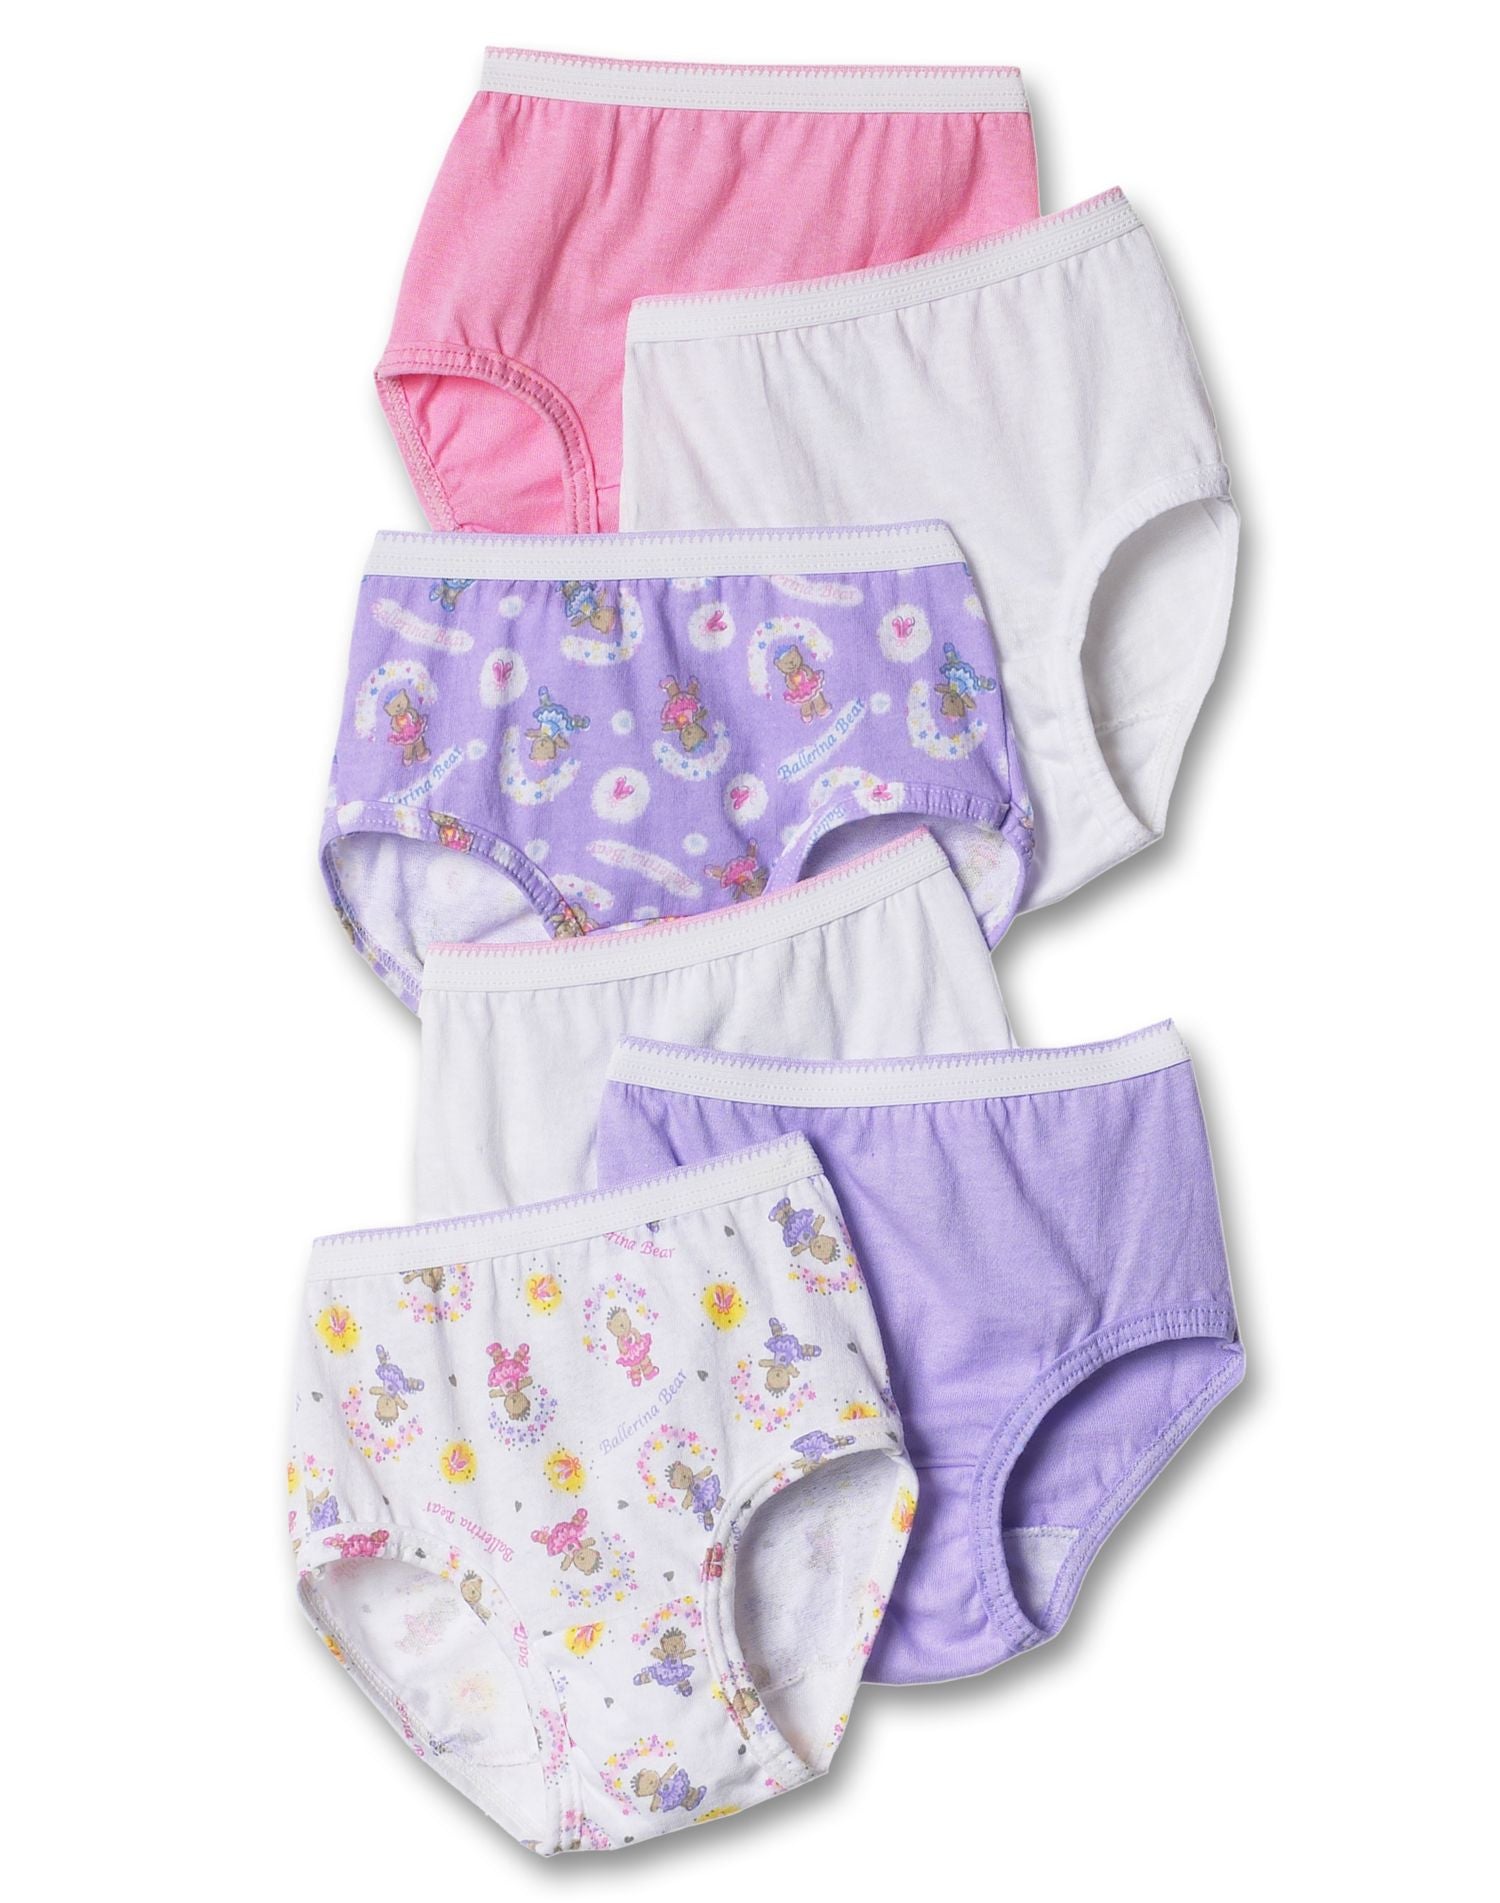 Women's Cotton Tagless Briefs - Hanes - Assorted Colors -Various